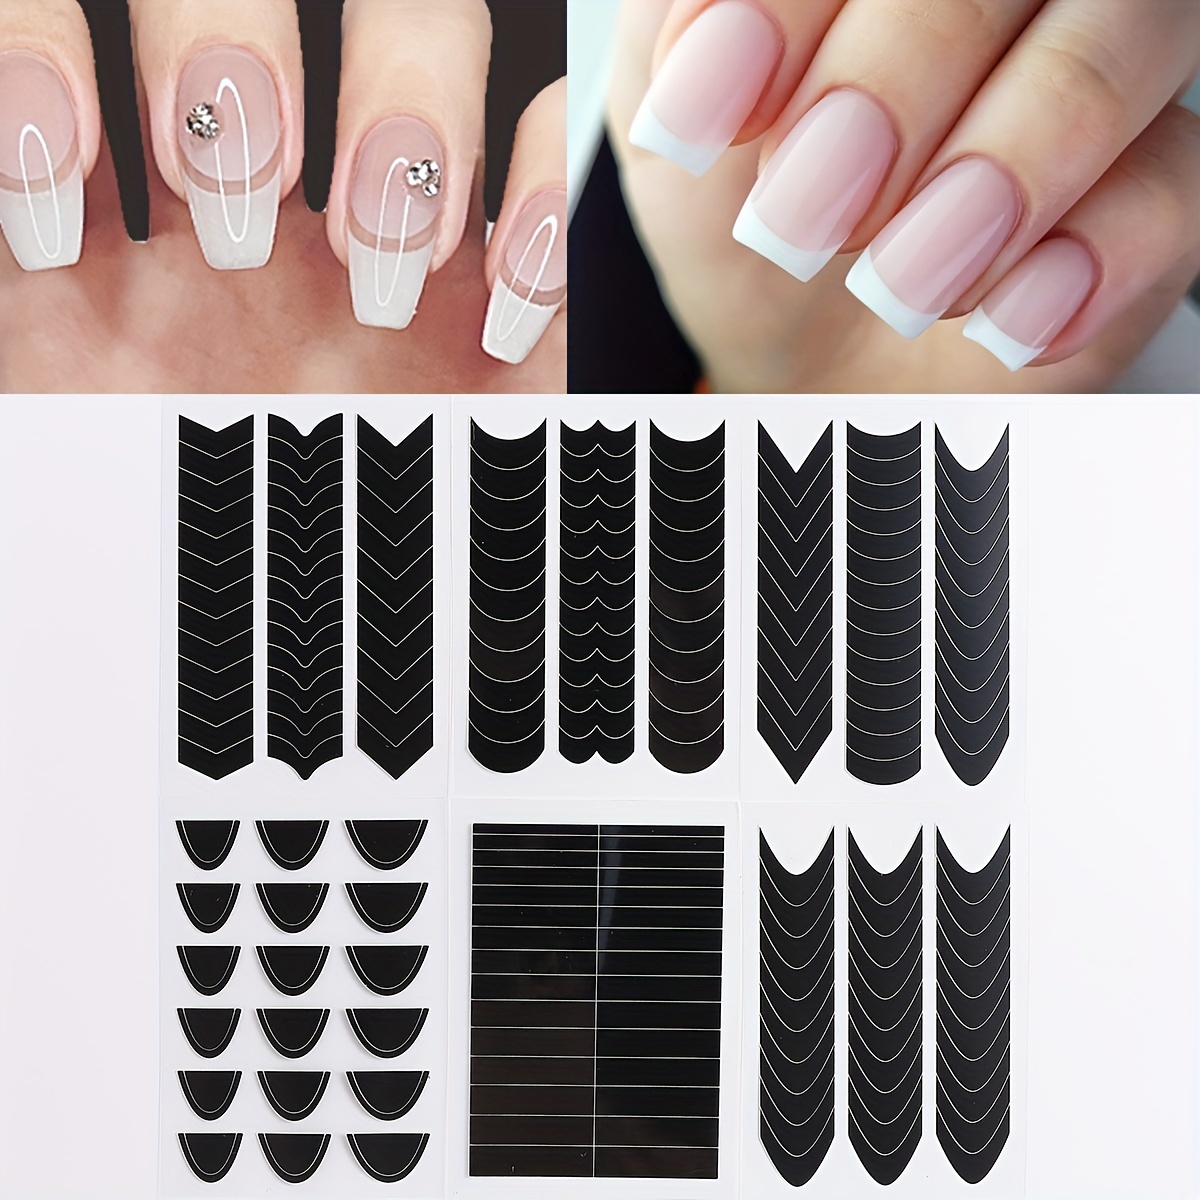 6 Sheets French Manicure Strips French Tip Nail Stickers Guides Tool for  Fingers and Toes, Black Self Adhesive Nail Art Stencils Stickers Decal for